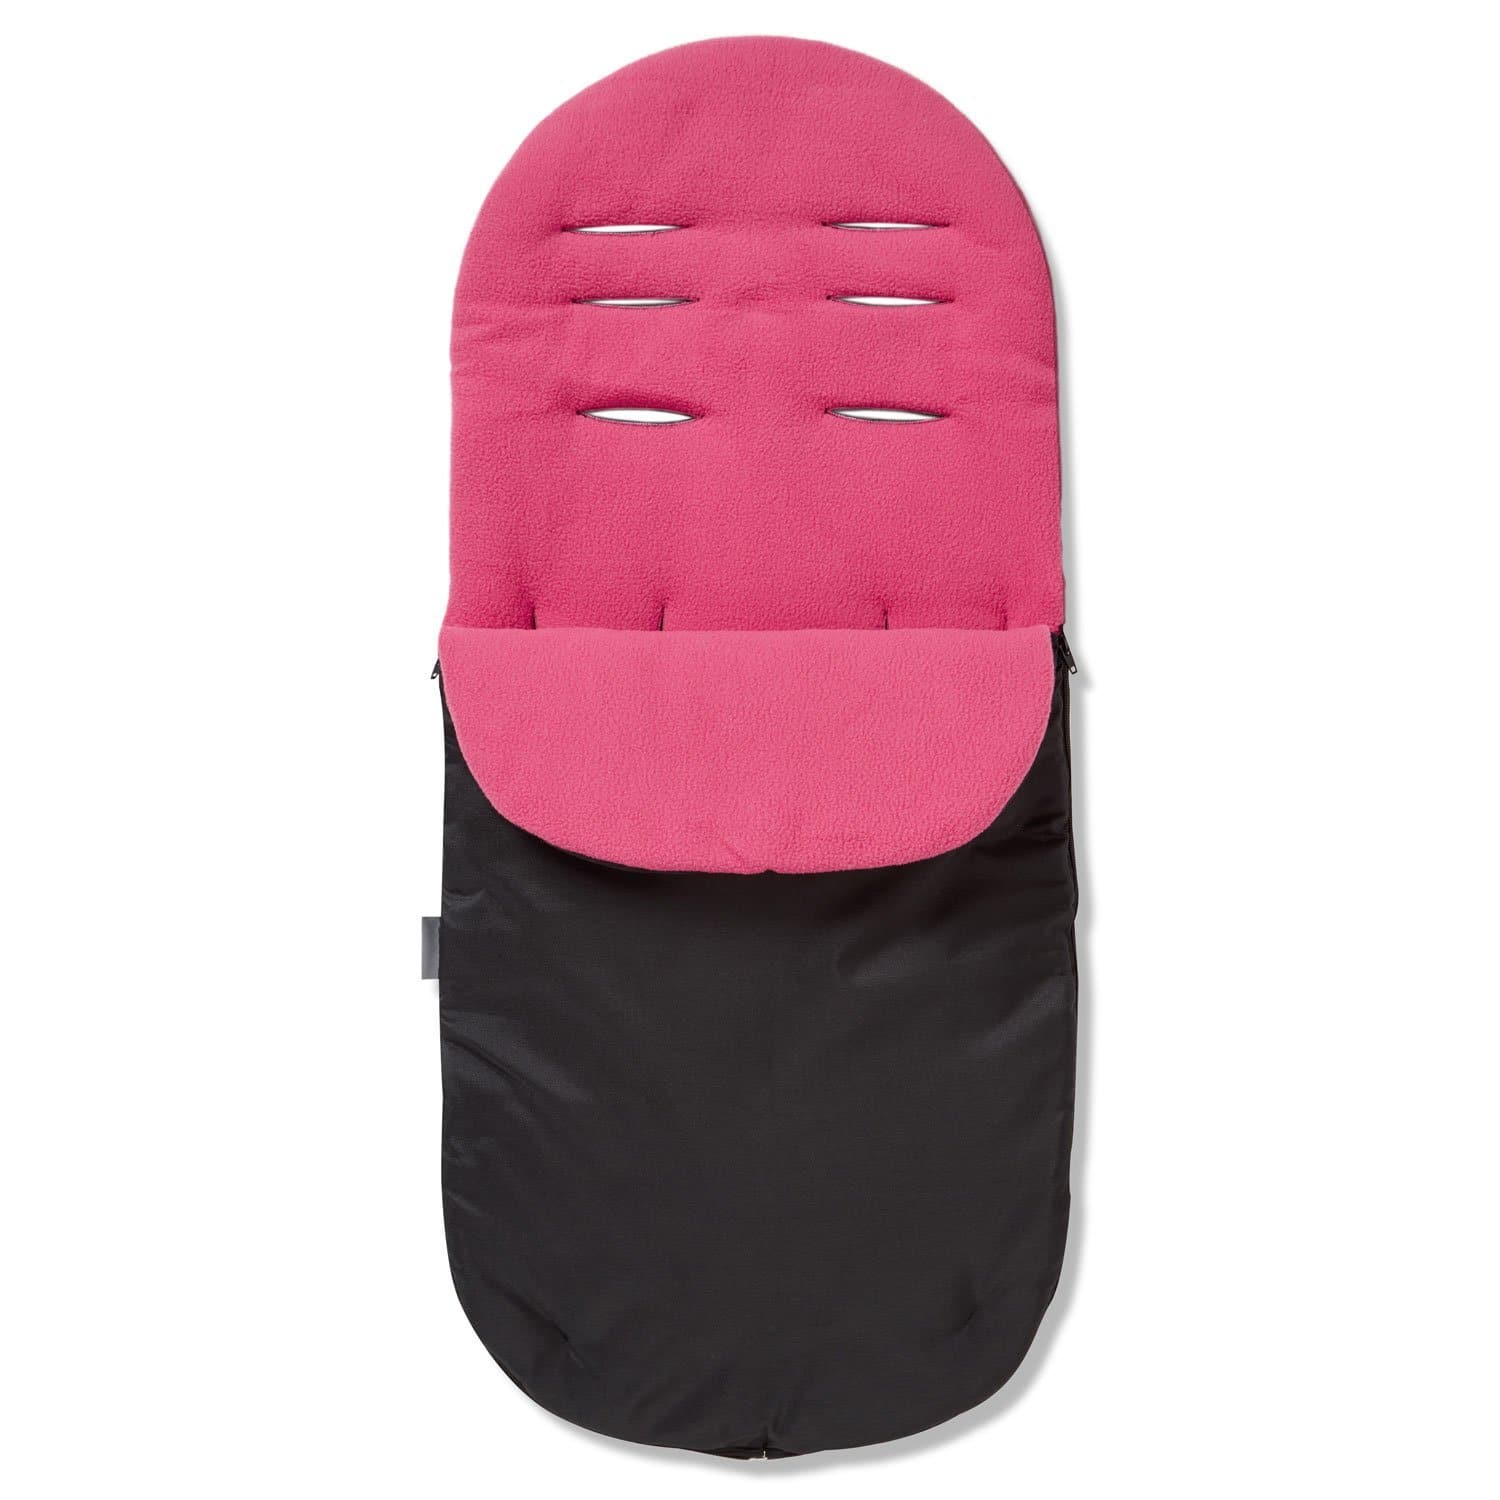 Footmuff / Cosy Toes Compatible with Babybus - Dark Pink / Fits All Models | For Your Little One